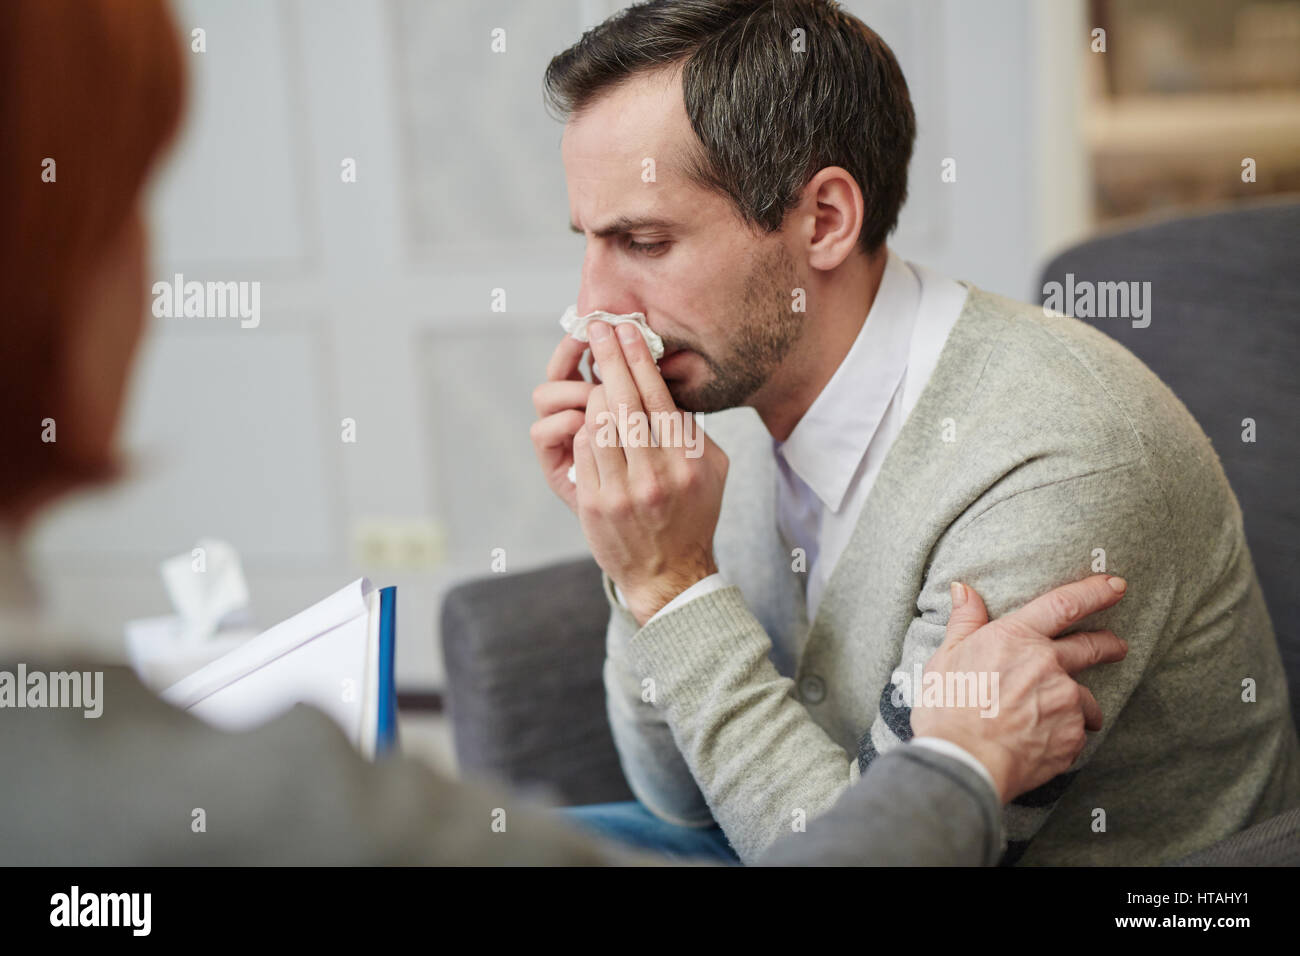 Crying man with handkerchief wiping tears while counselor reassuring him Stock Photo